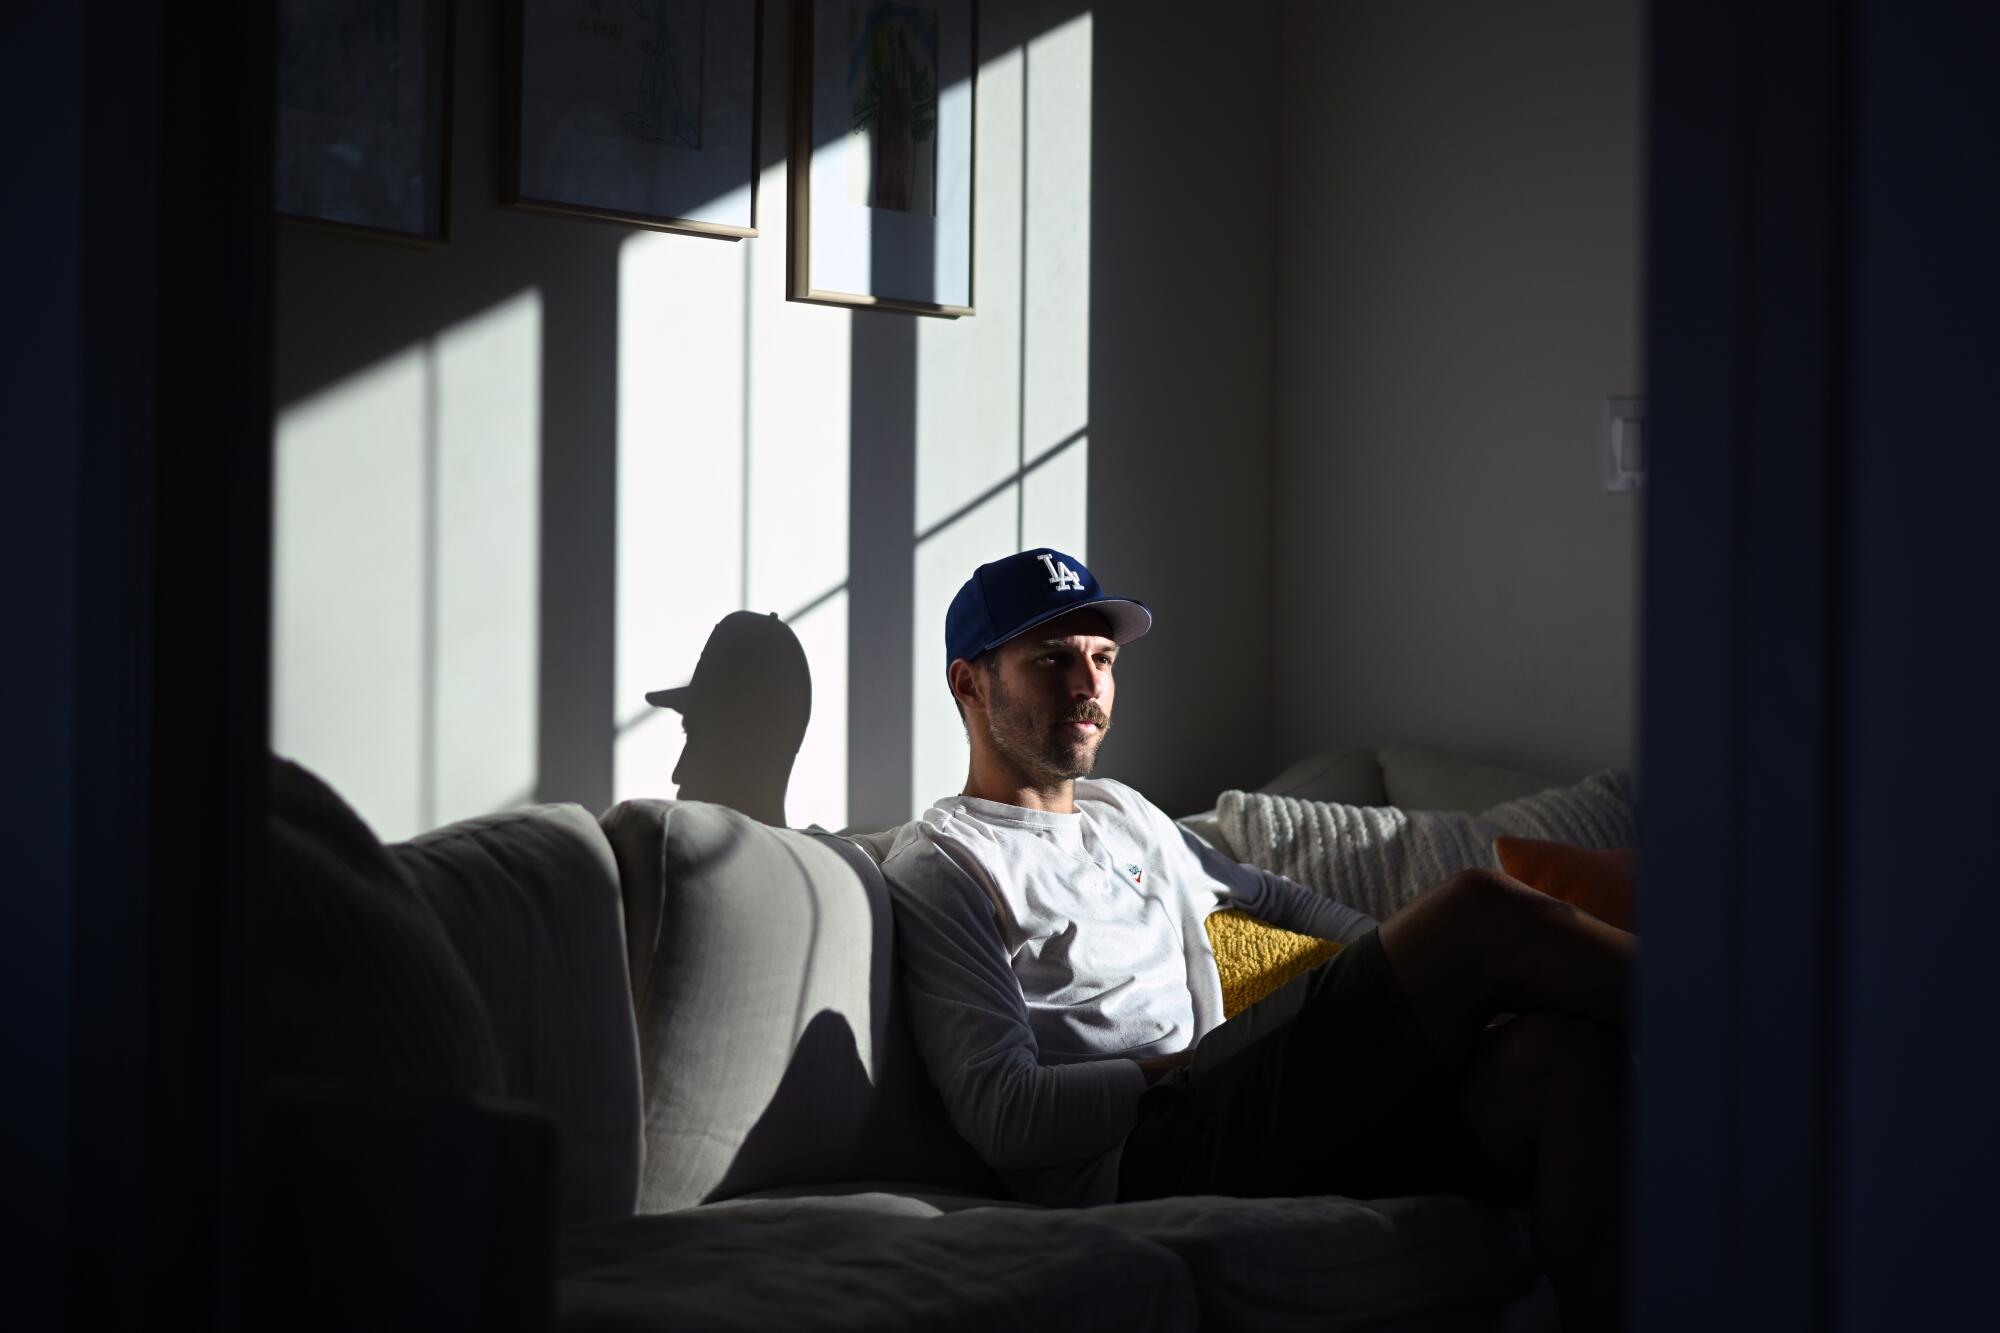 LAFC defender Ryan Hollingshead sits on a couch in his home as sunlight hits his face